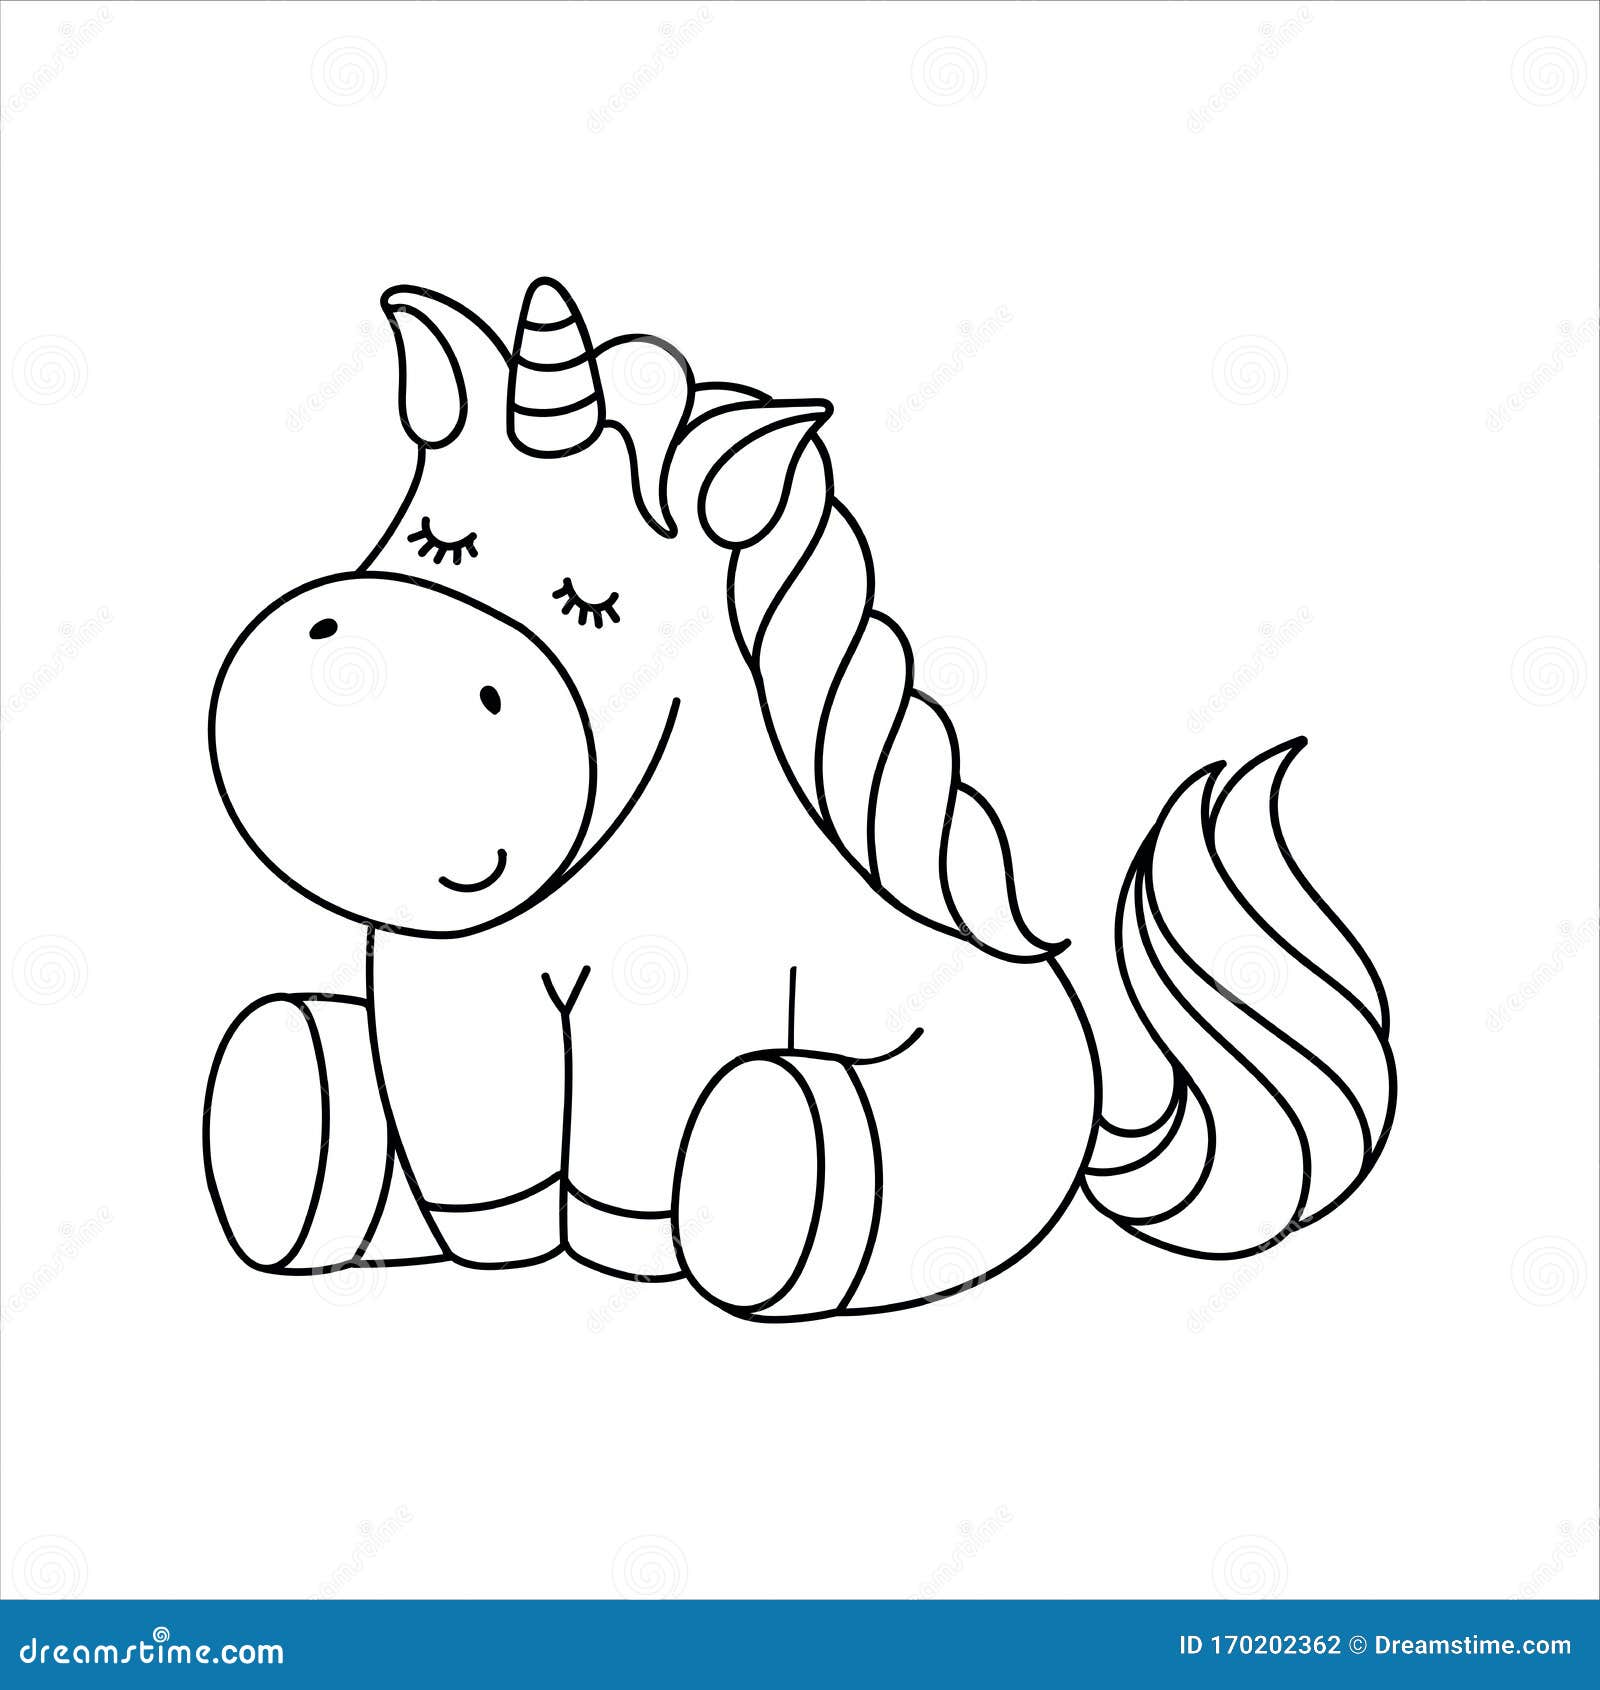 Cute Cartoon Fairytale Unicorn   Coloring Page for Kids Stock ...